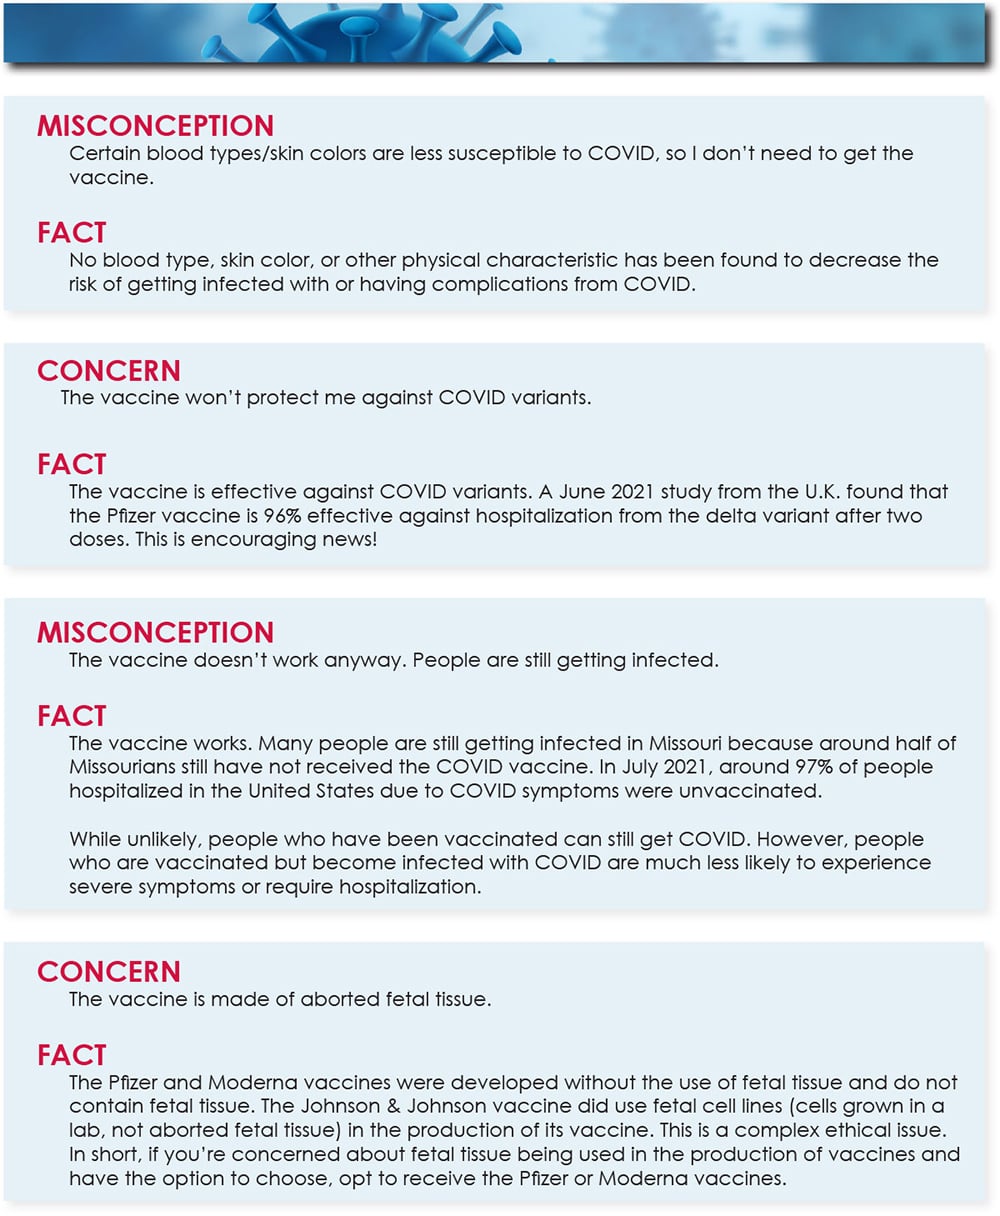 COVID Vaccine Concerns and Misconceptions